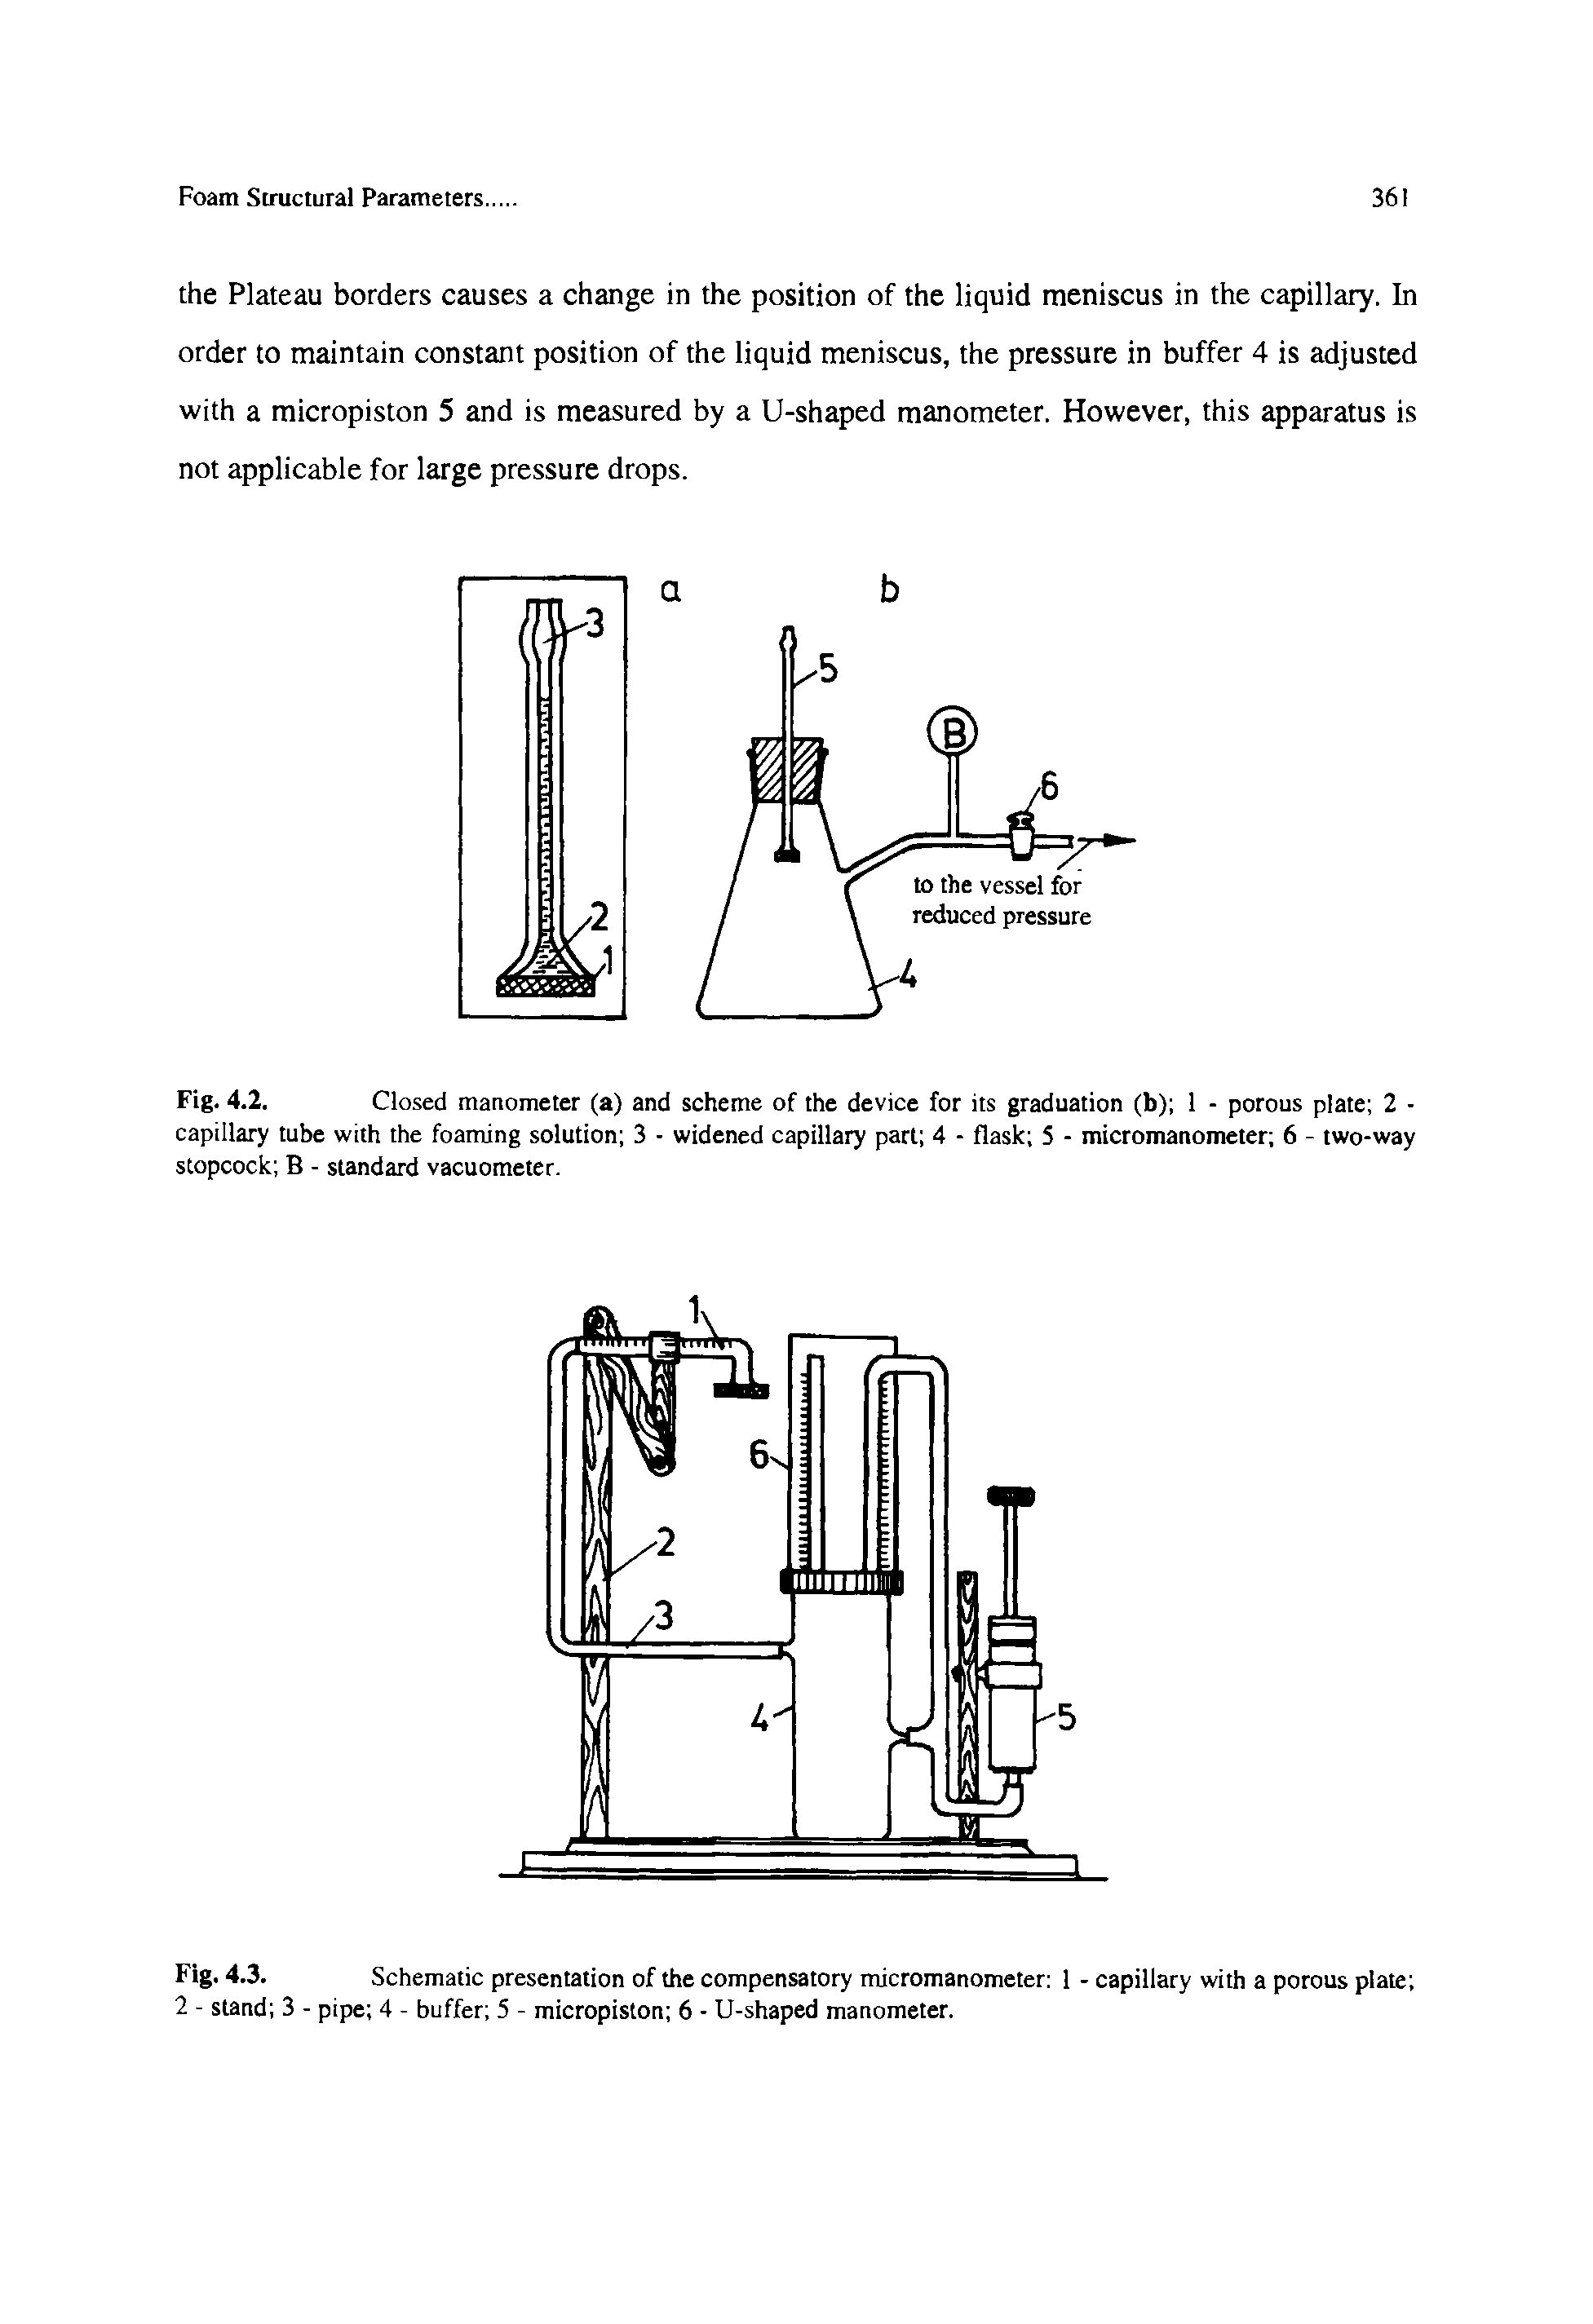 Fig. 4.2. Closed manometer (a) and scheme of the device for its graduation (b) 1 - porous plate 2 -...